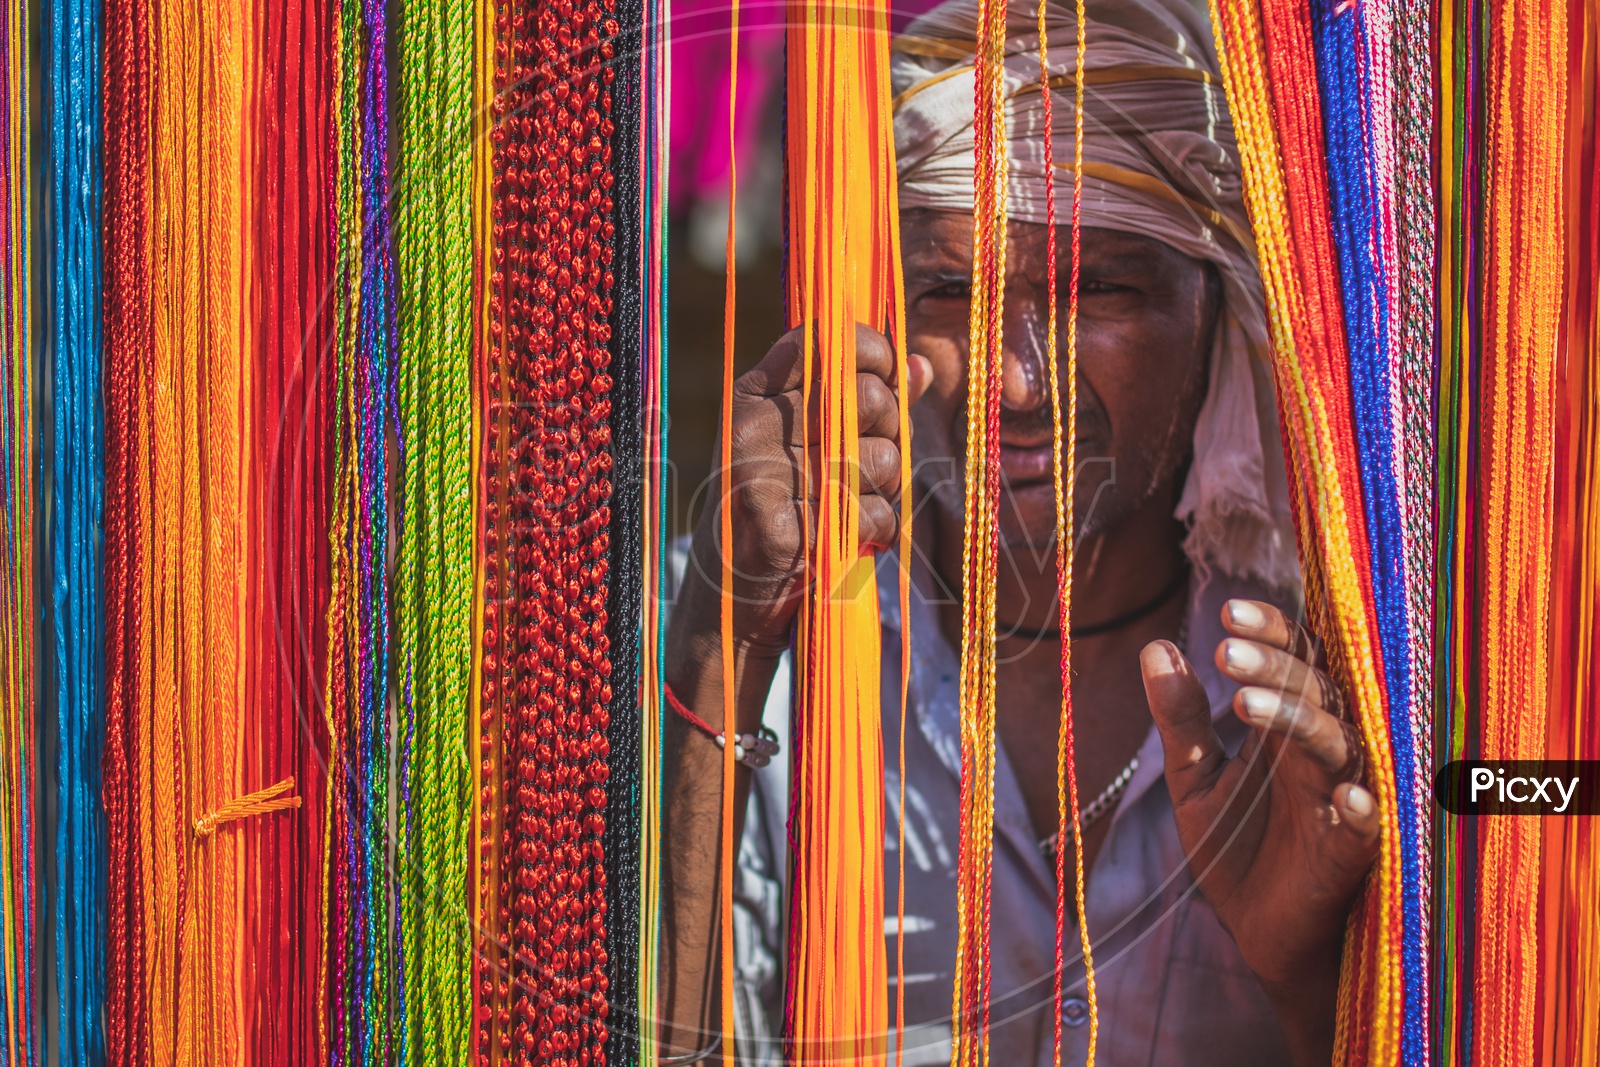 A man on streets selling threads of different colors